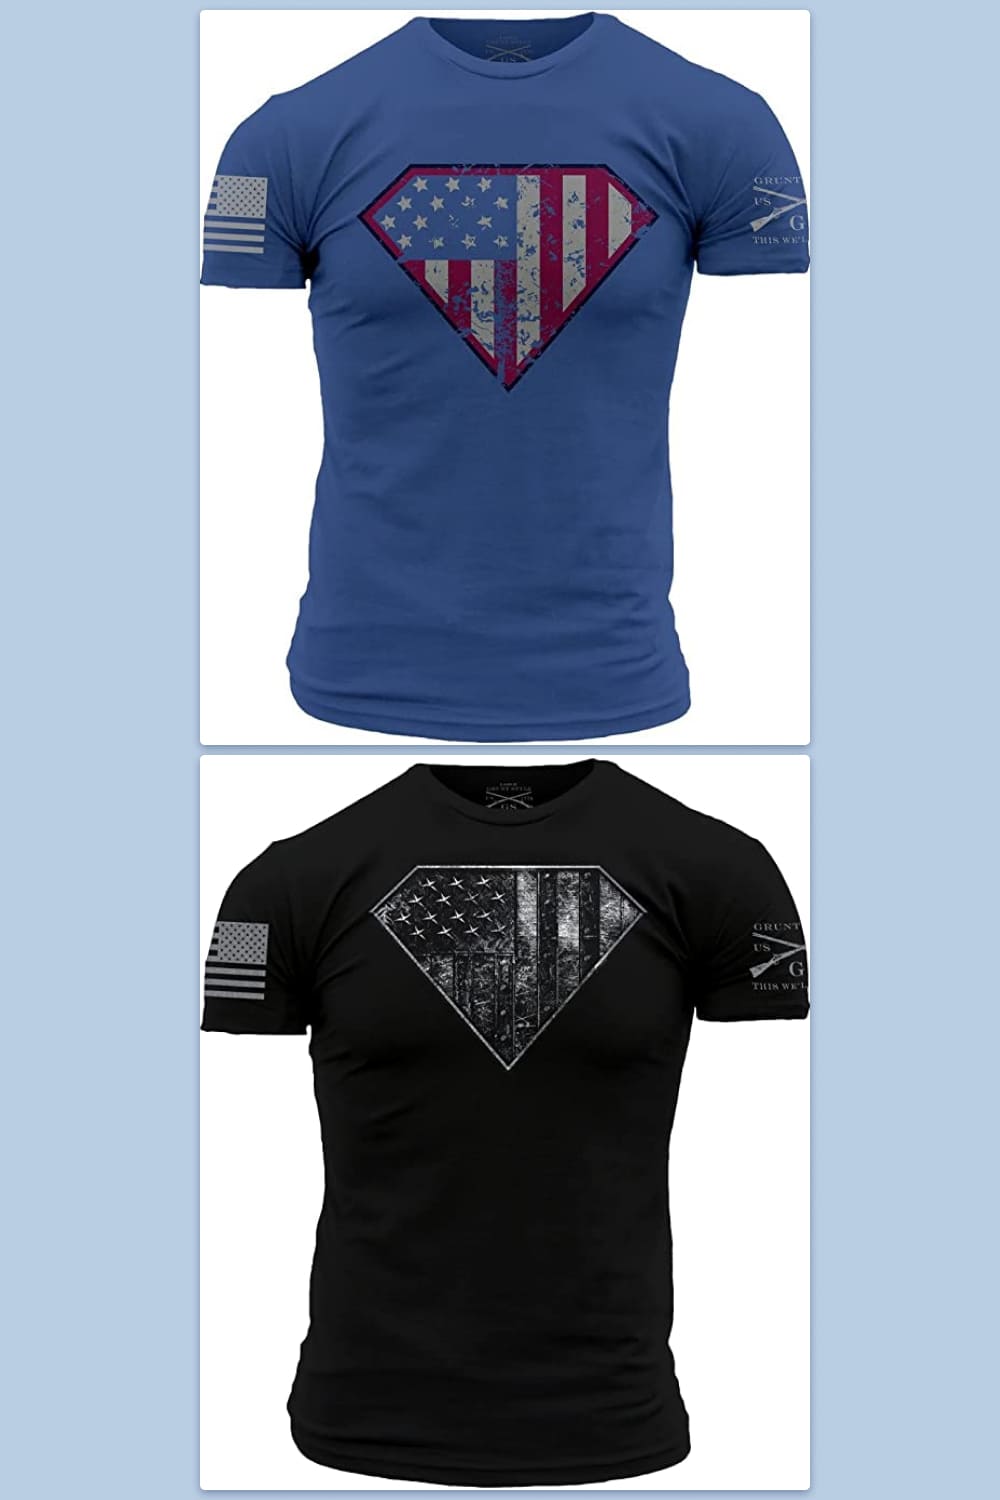 T-shirt with USA flag in superman logo.